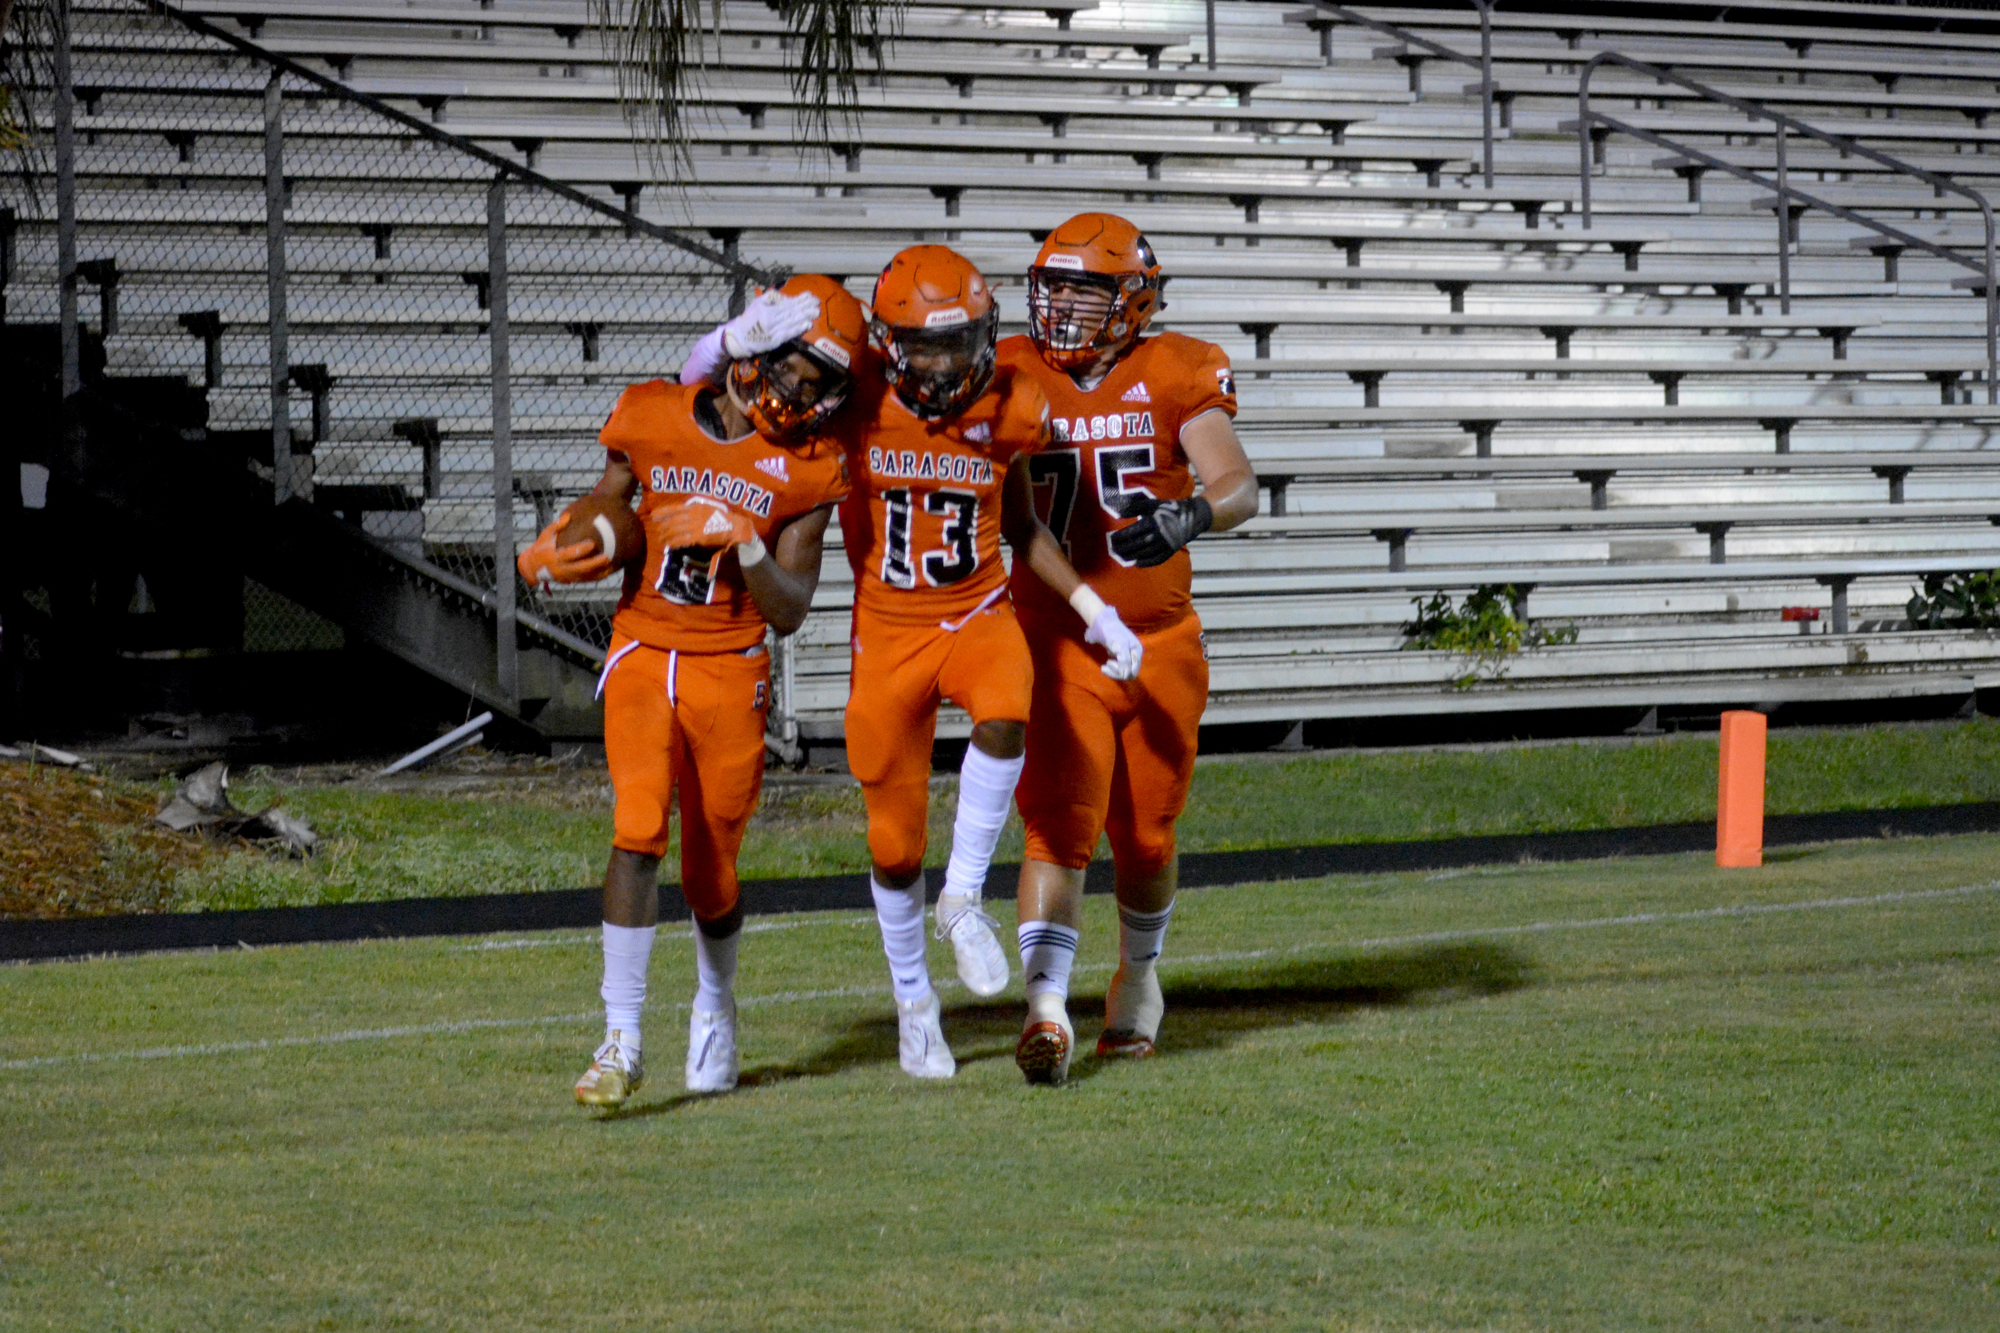 Sarasota High seniors Thomas Pack, McKeyvion Cain and Jacob Carnes celebrate after a Pack touchdown run on Sept. 13. Pack said of all the big senior events, he would be most disappointed by graduation getting canceled.